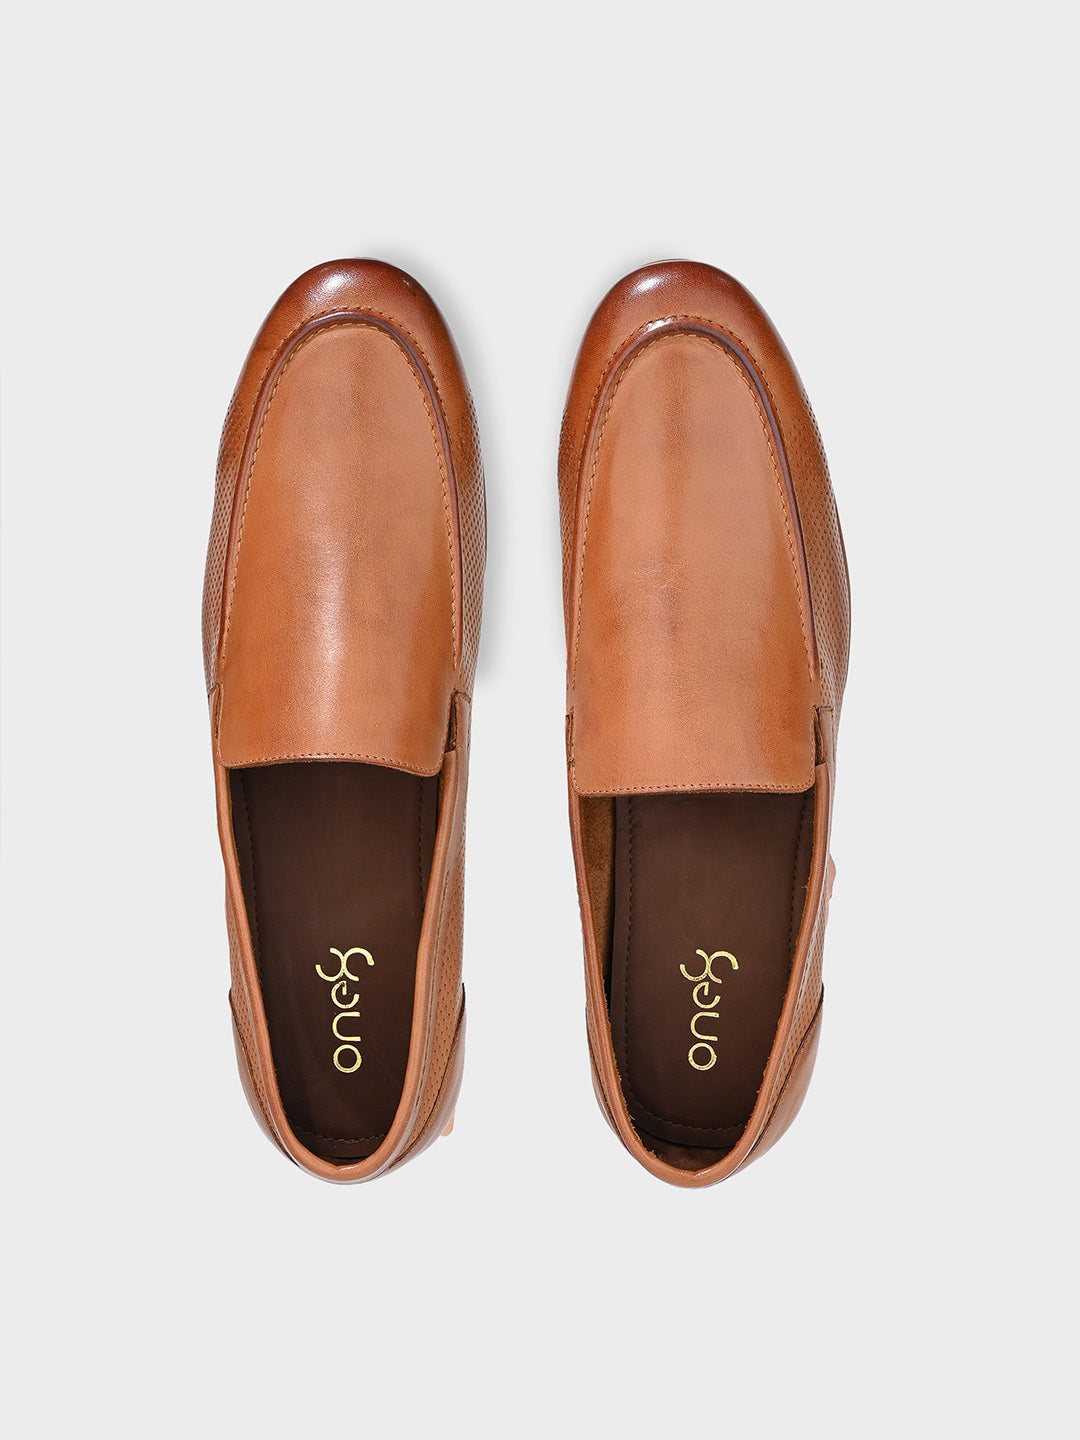 Classic Tan Leather Slip-On Loafer Shoes for Men